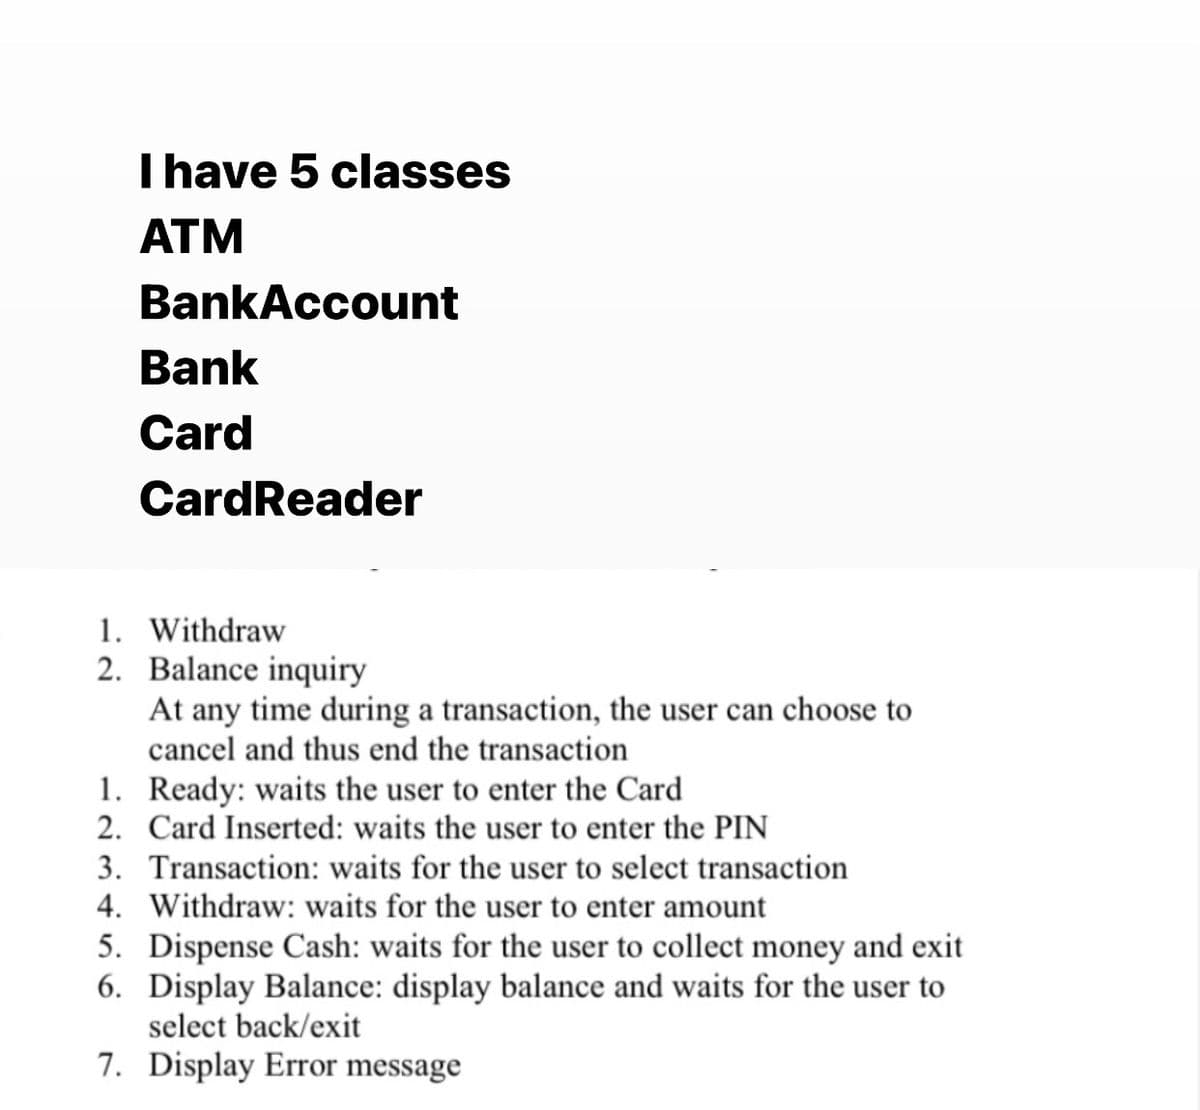 I have 5 classes
ATM
BankAccount
Bank
Card
CardReader
1. Withdraw
2. Balance inquiry
At any time during a transaction, the user can choose to
cancel and thus end the transaction
1. Ready: waits the user to enter the Card
2. Card Inserted: waits the user to enter the PIN
3. Transaction: waits for the user to select transaction
4. Withdraw: waits for the user to enter amount
5. Dispense Cash: waits for the user to collect money and exit
6. Display Balance: display balance and waits for the user to
select back/exit
7. Display Error message
